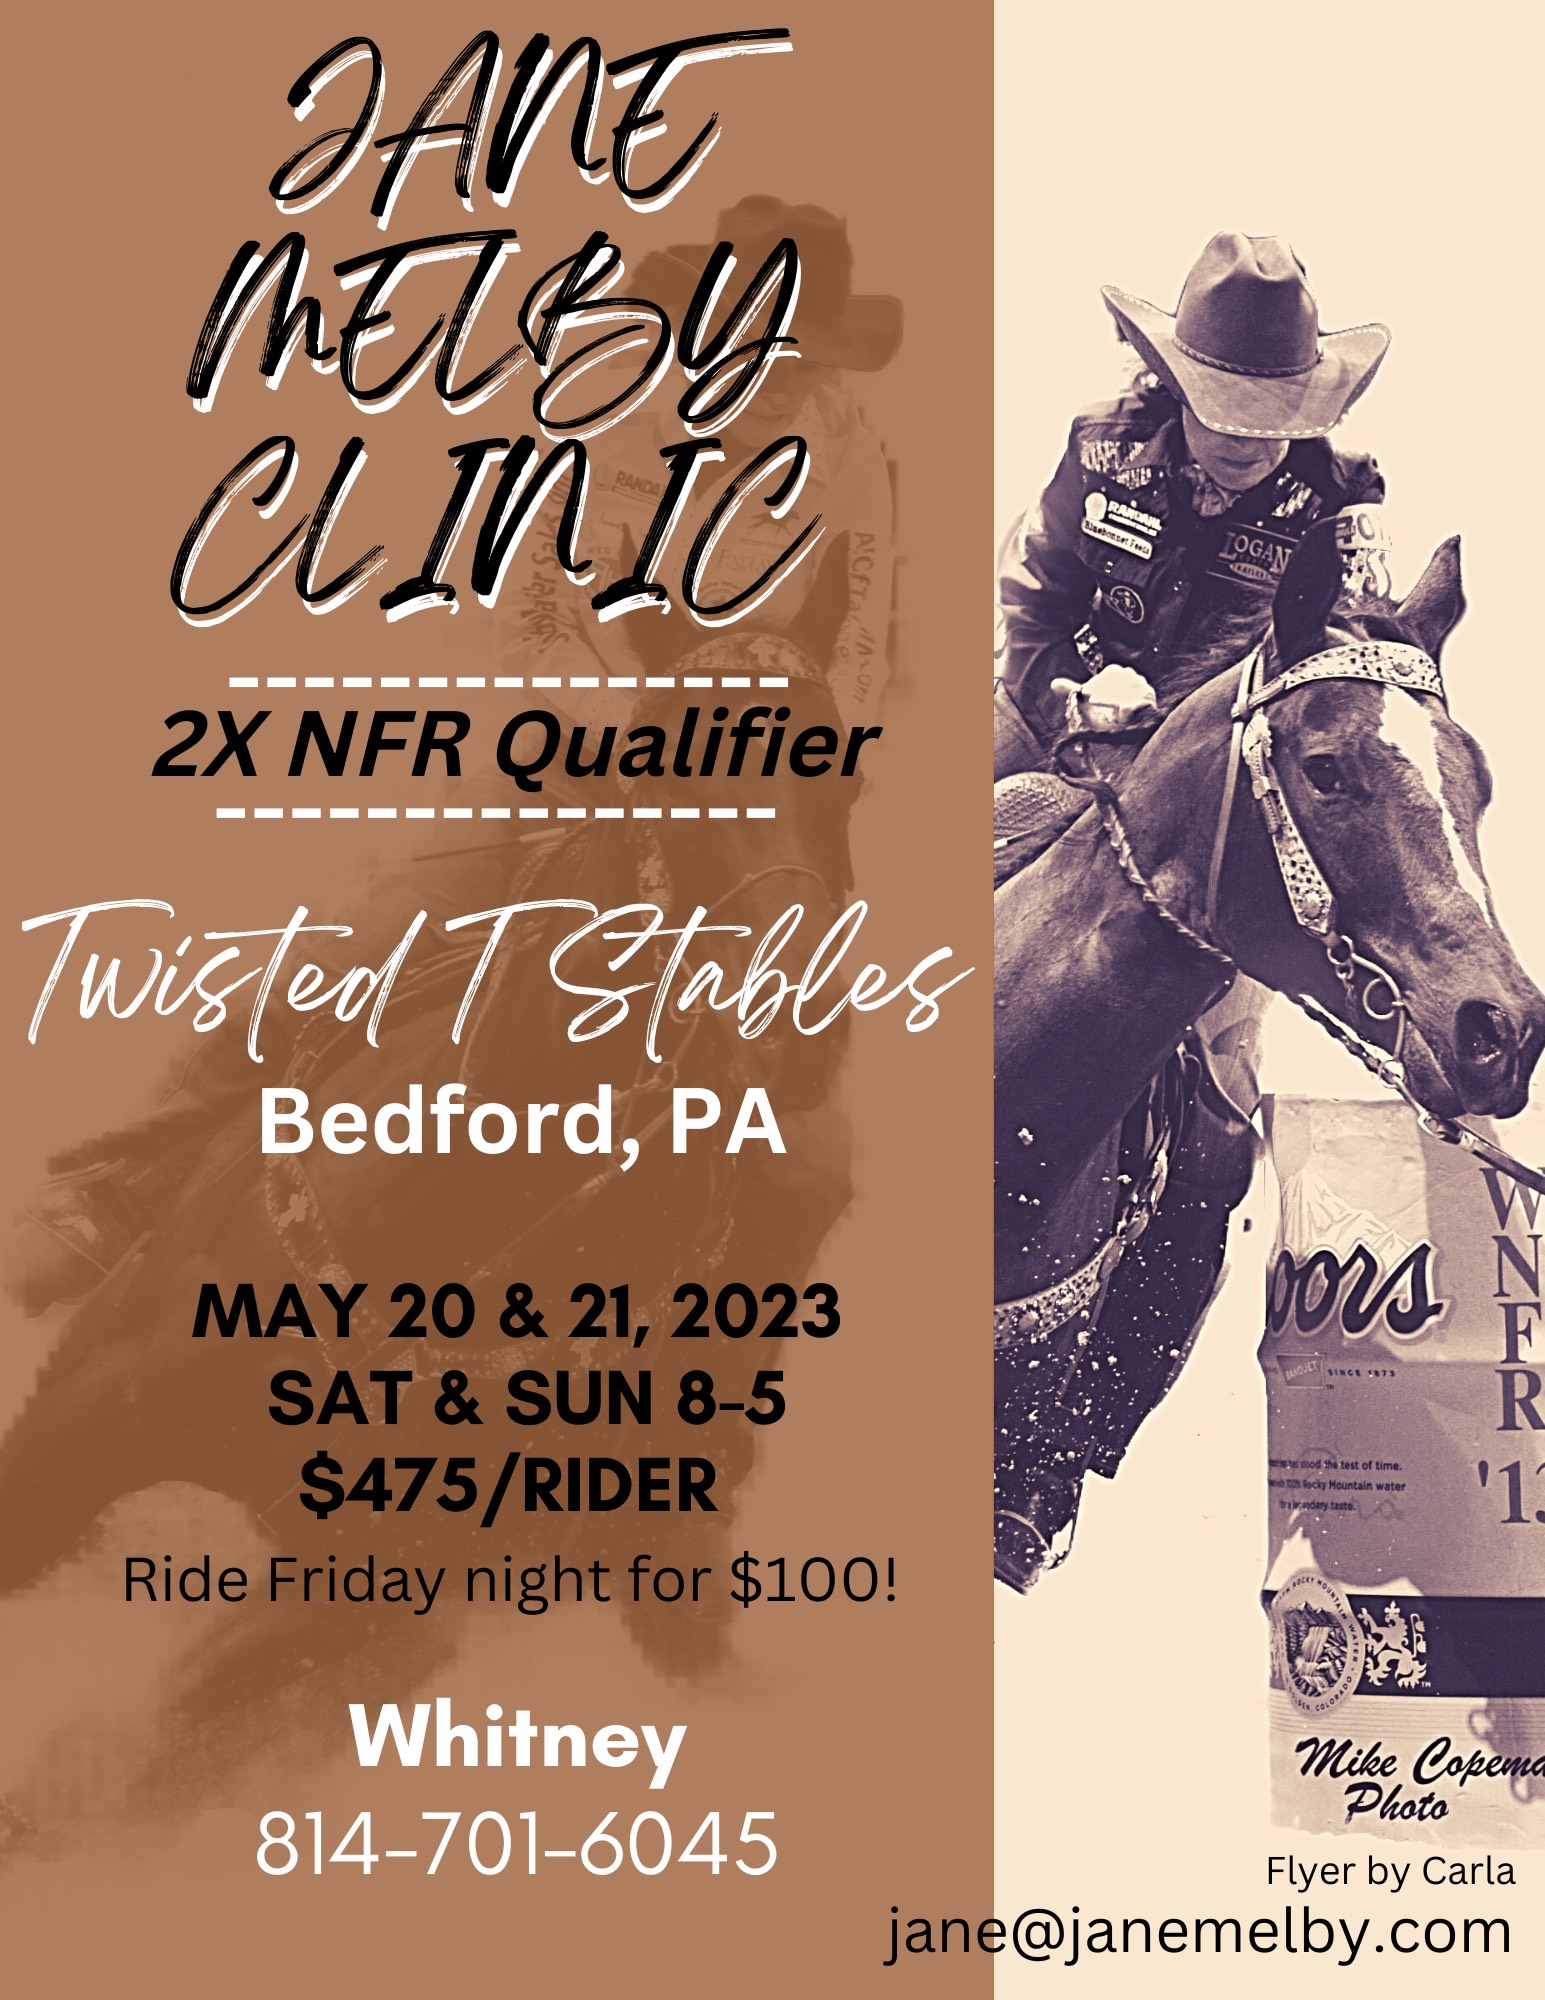 Jane Melby Clinic Bedford, PA 